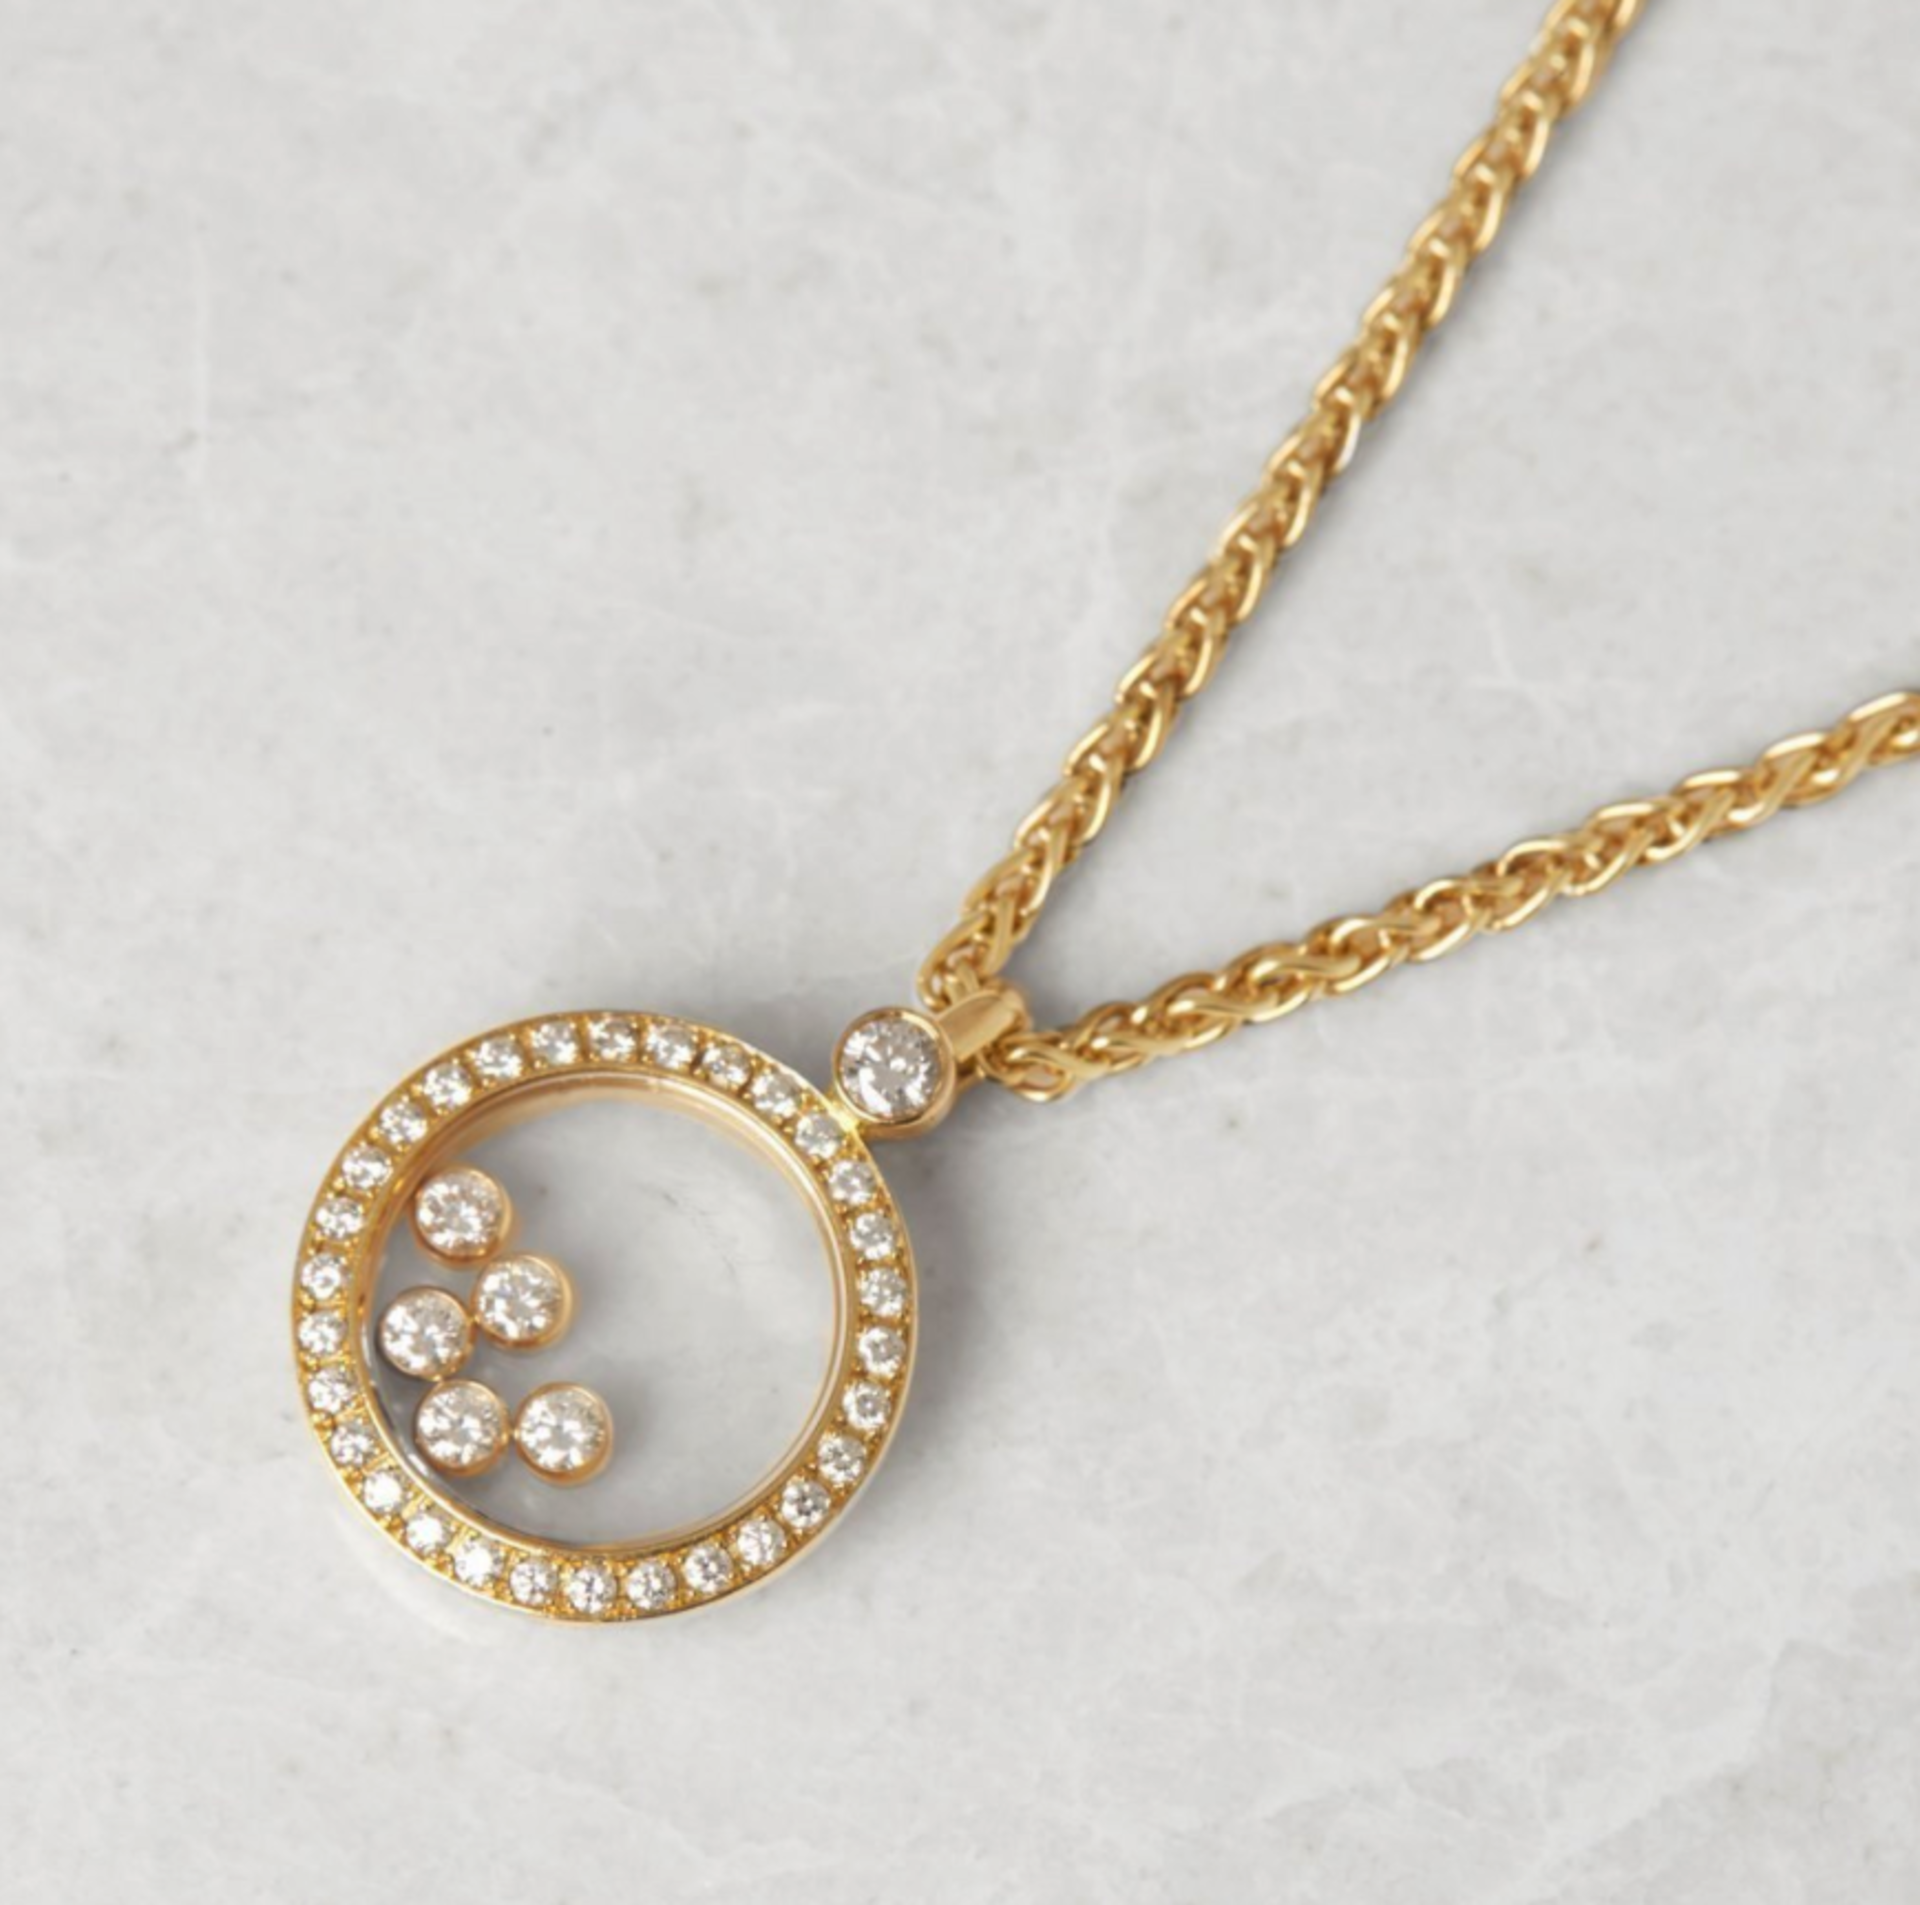 Chopard 18k Yellow Gold Happy Diamonds Necklace - Image 4 of 9